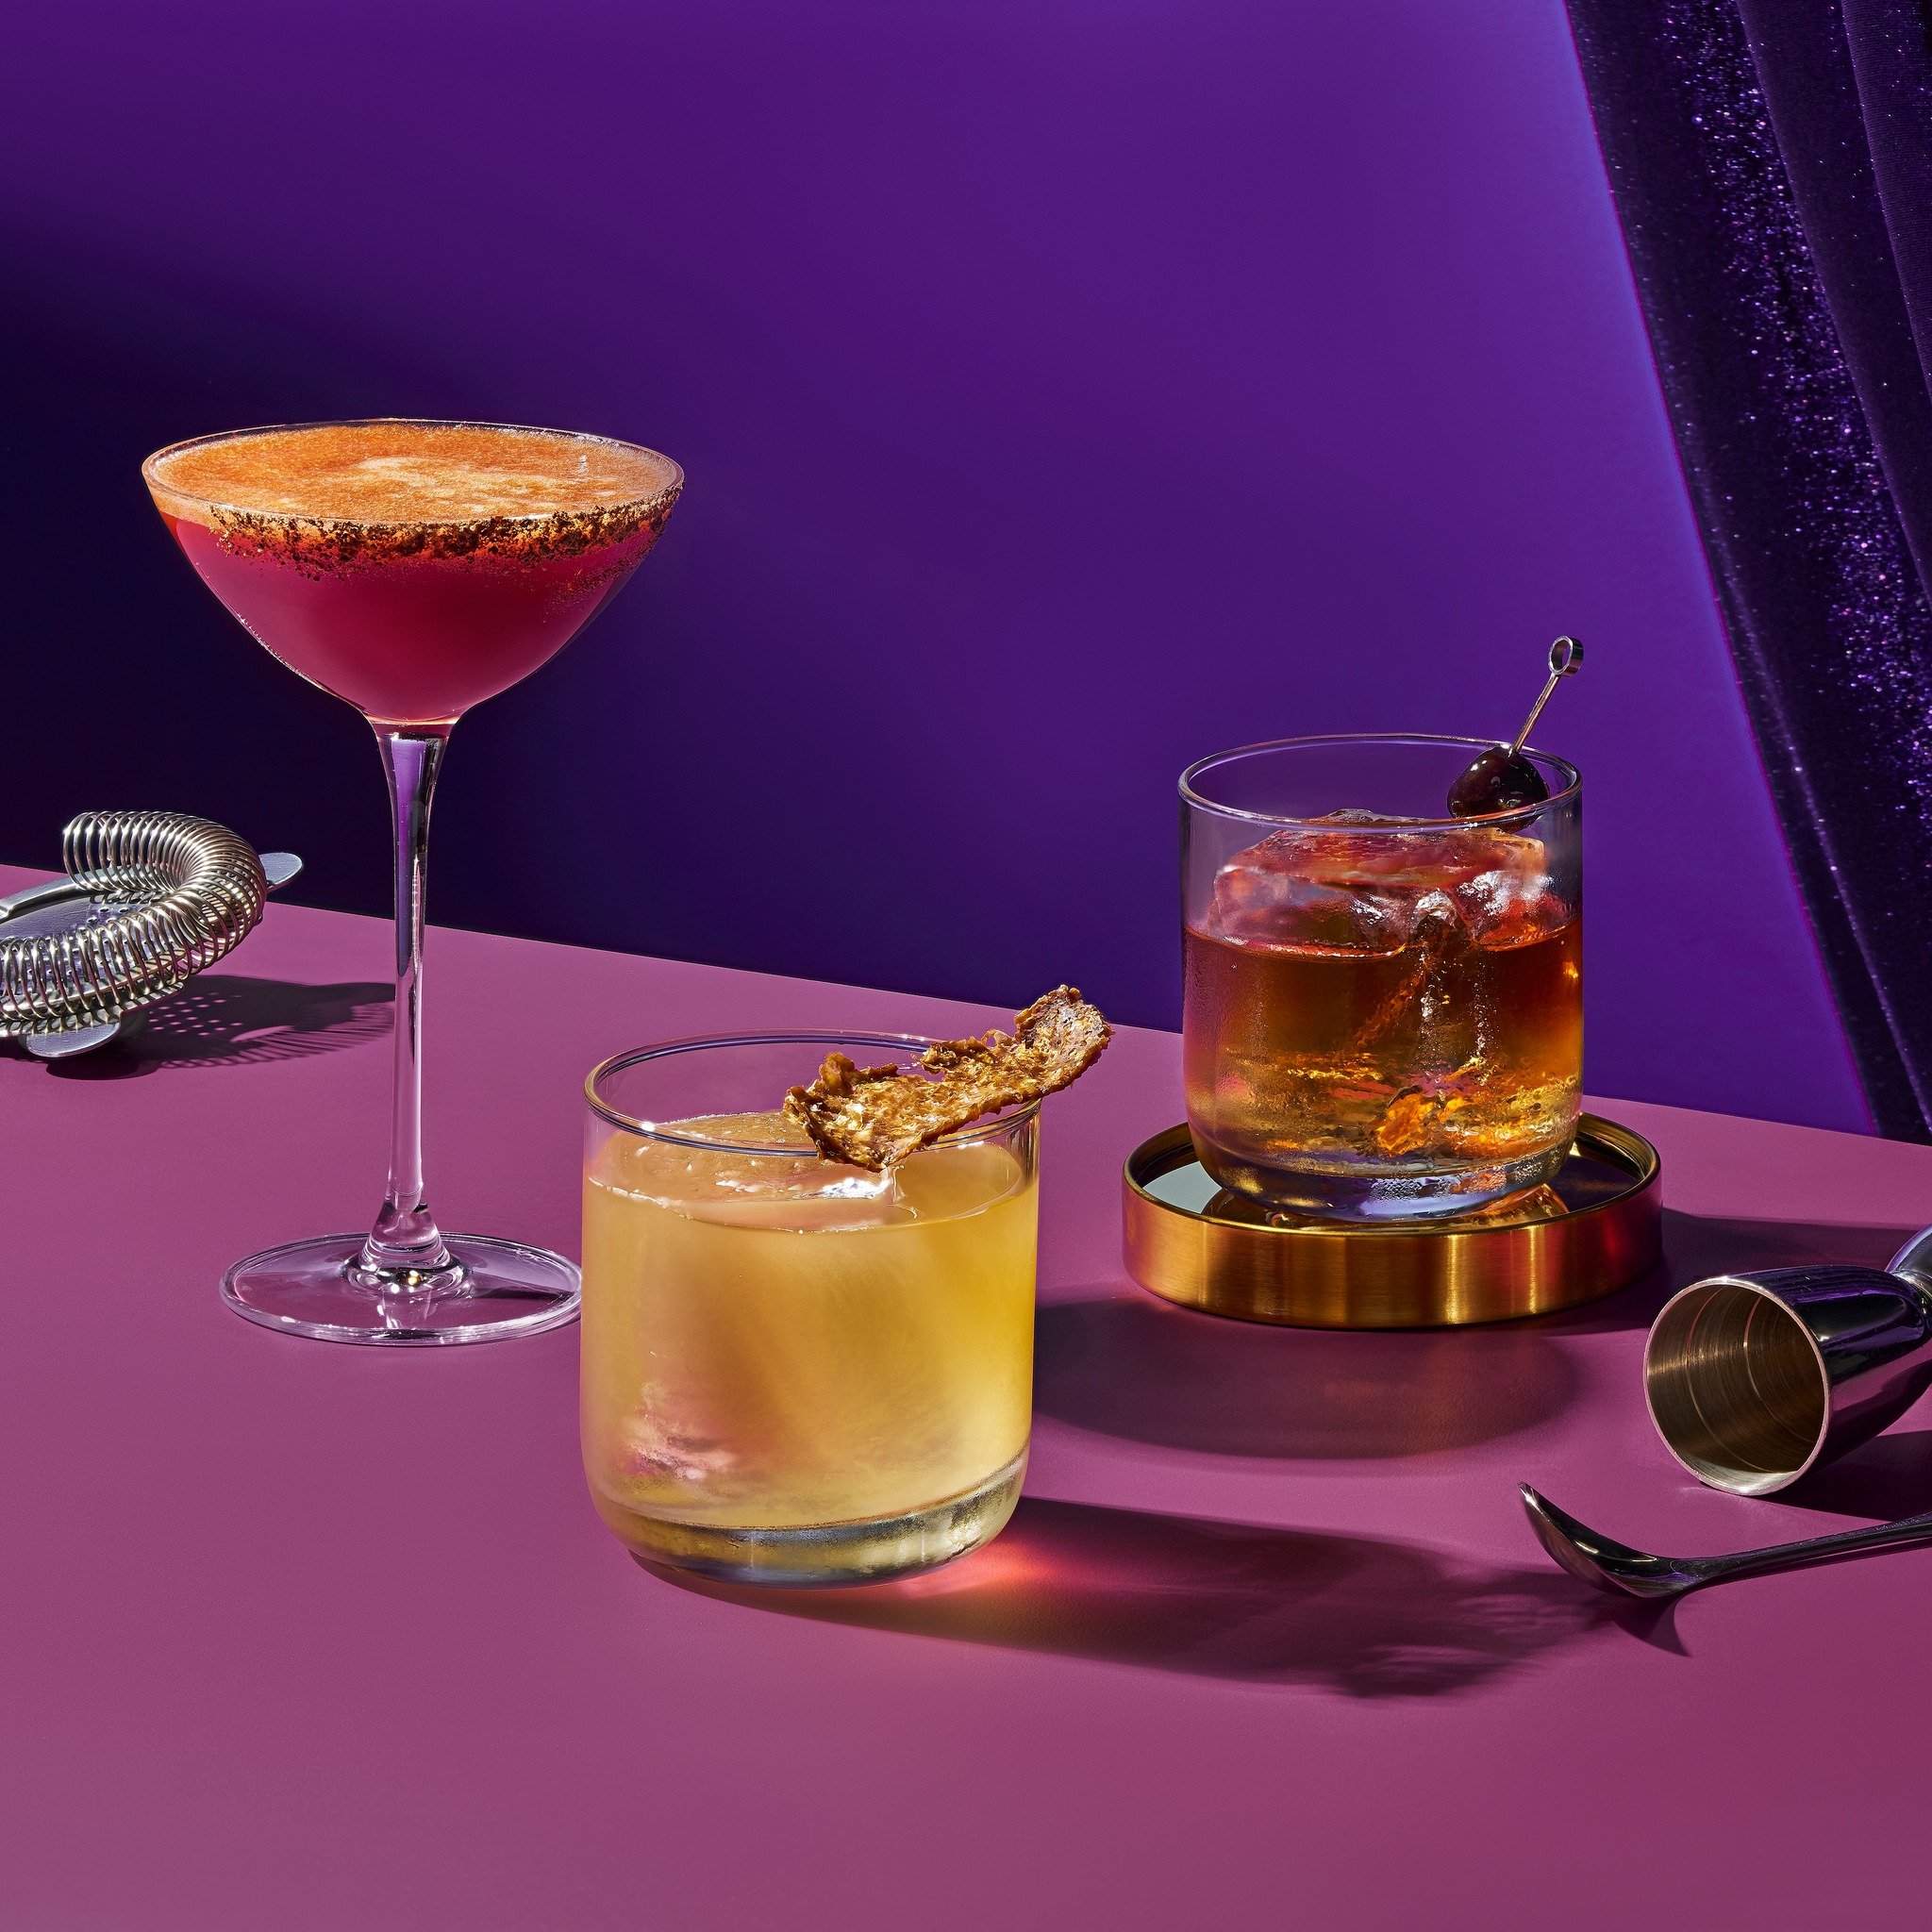 Every kick-ass cocktail is a result of skill and a creative act. 

Like the cocktails in the Purple section of our &lsquo;That&rsquo;s A Nice Jacket!&rsquo; menu, we honour techniques in bartending that&rsquo;s more than just mixing.

Cheers to #Worl